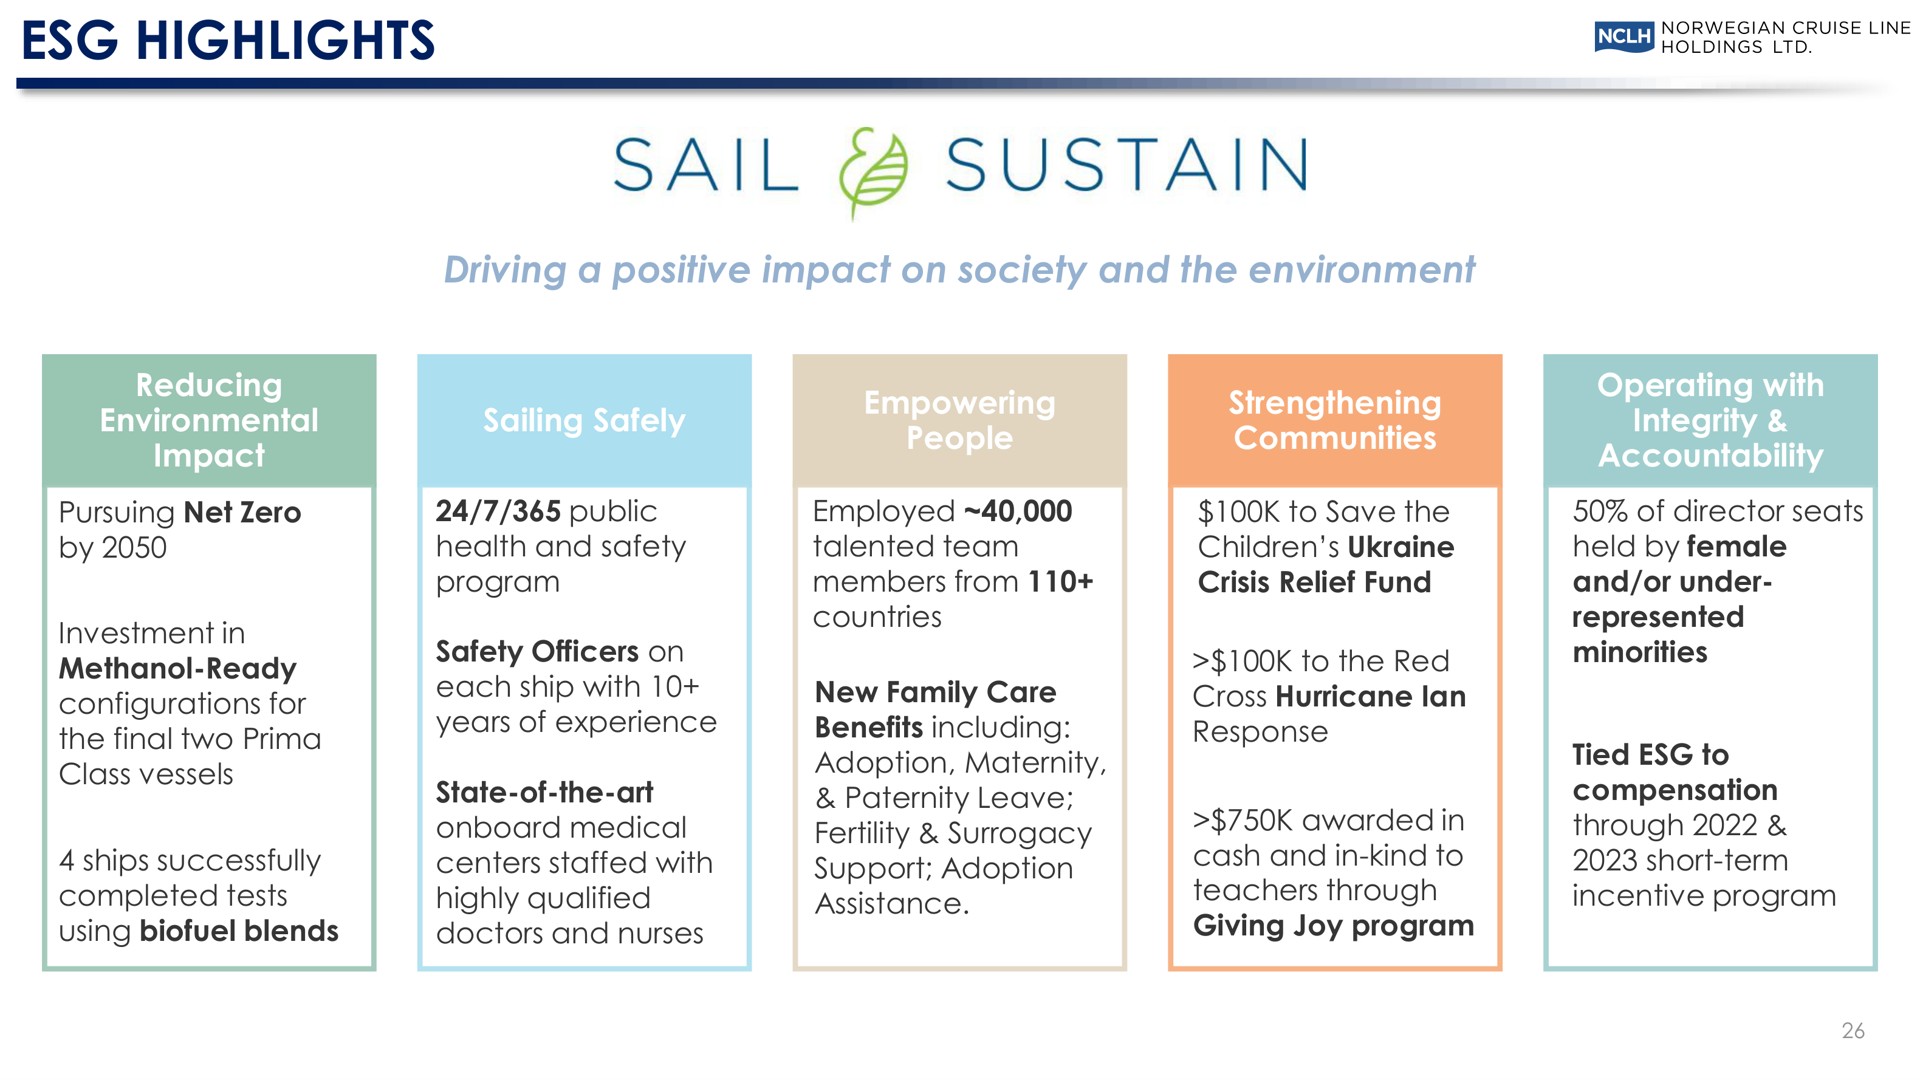 highlights driving a positive impact on society and the environment sail sustain | Norwegian Cruise Line